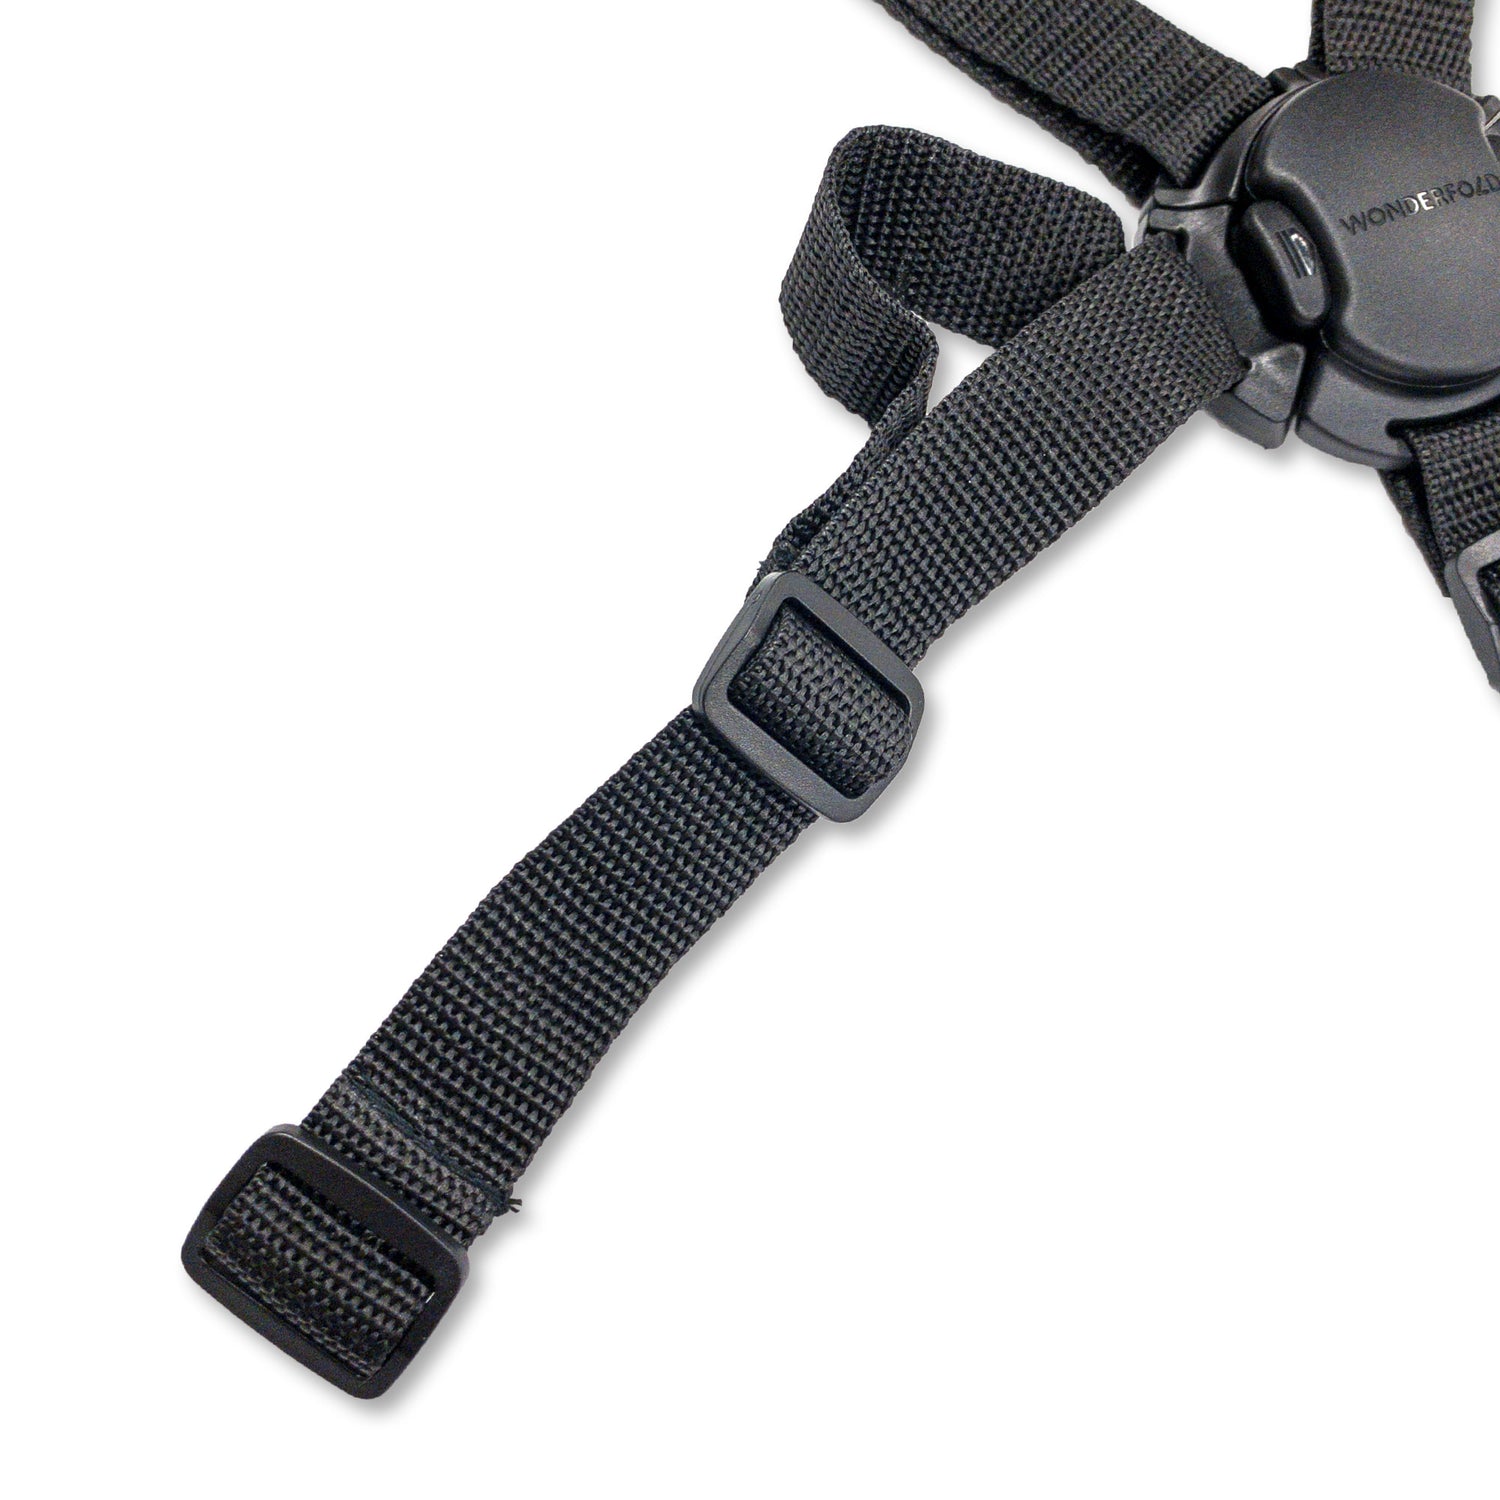 Automatic Magnetic Seatbelt Buckle with 5-Point Harness - Studio Image - Top Down - Strap